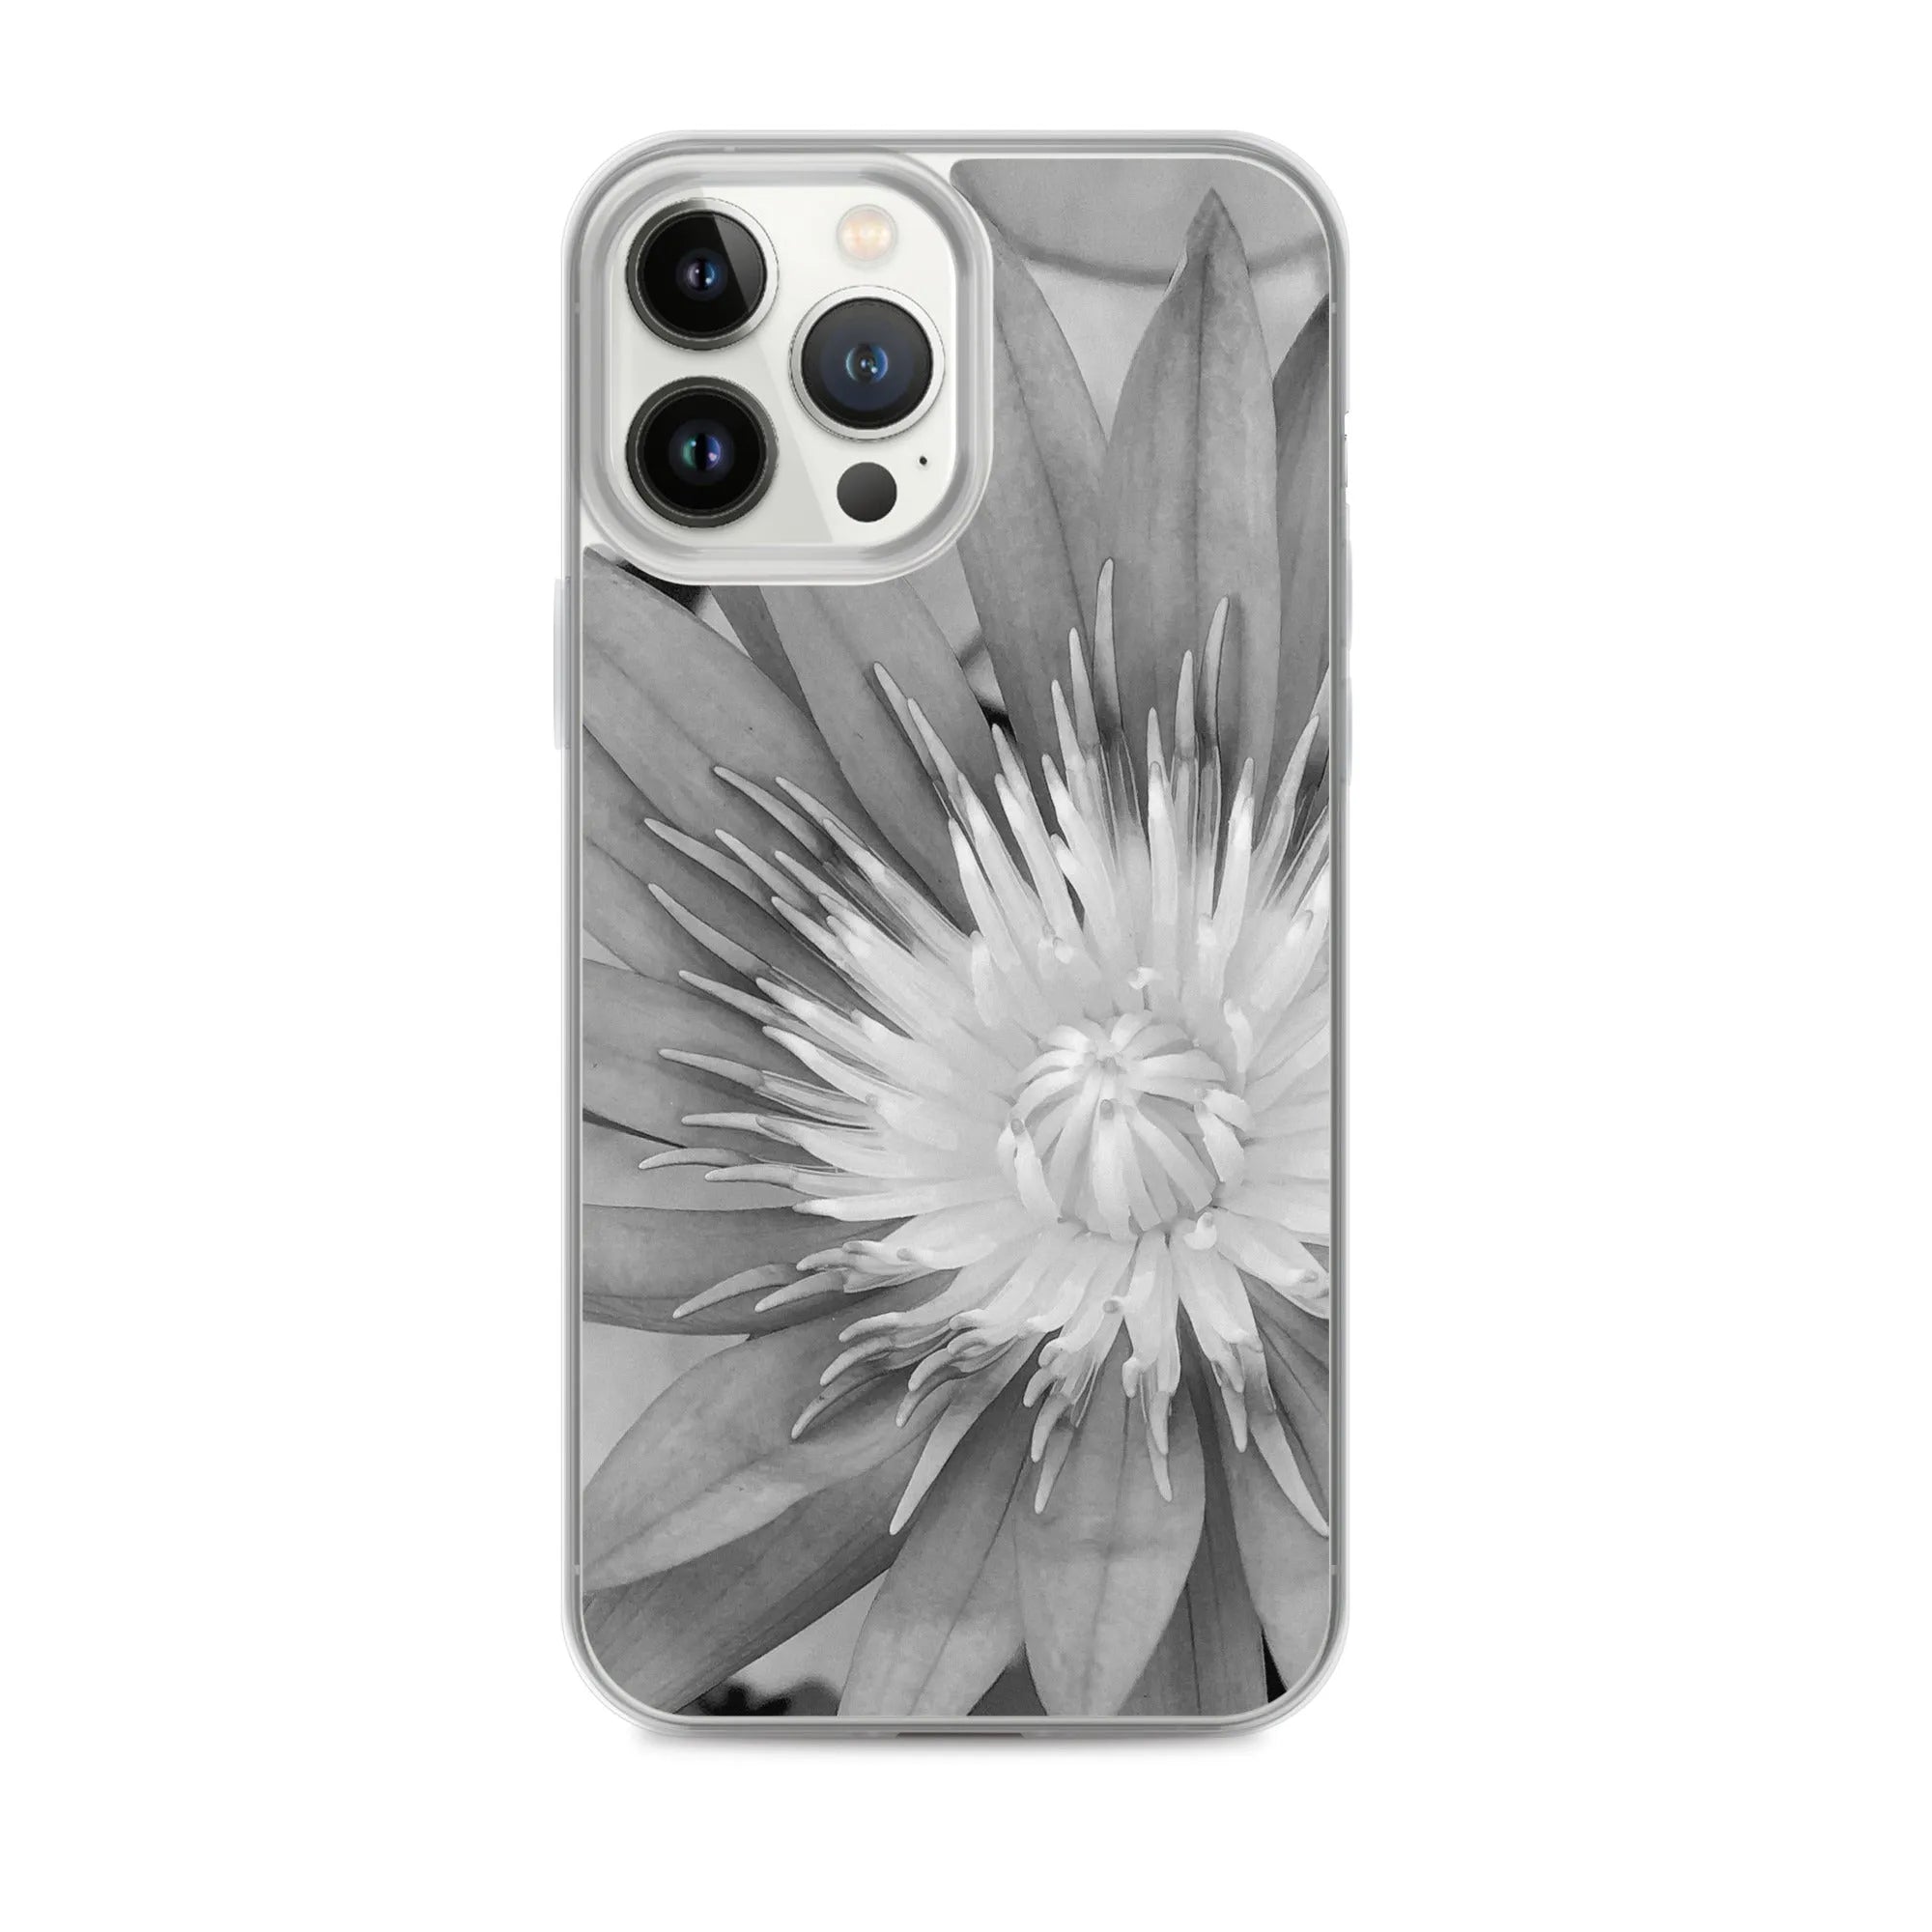 Lilliput Floral Iphone Case - Black And White - Iphone 13 Pro Max - Mobile Phone Cases - Aesthetic Art